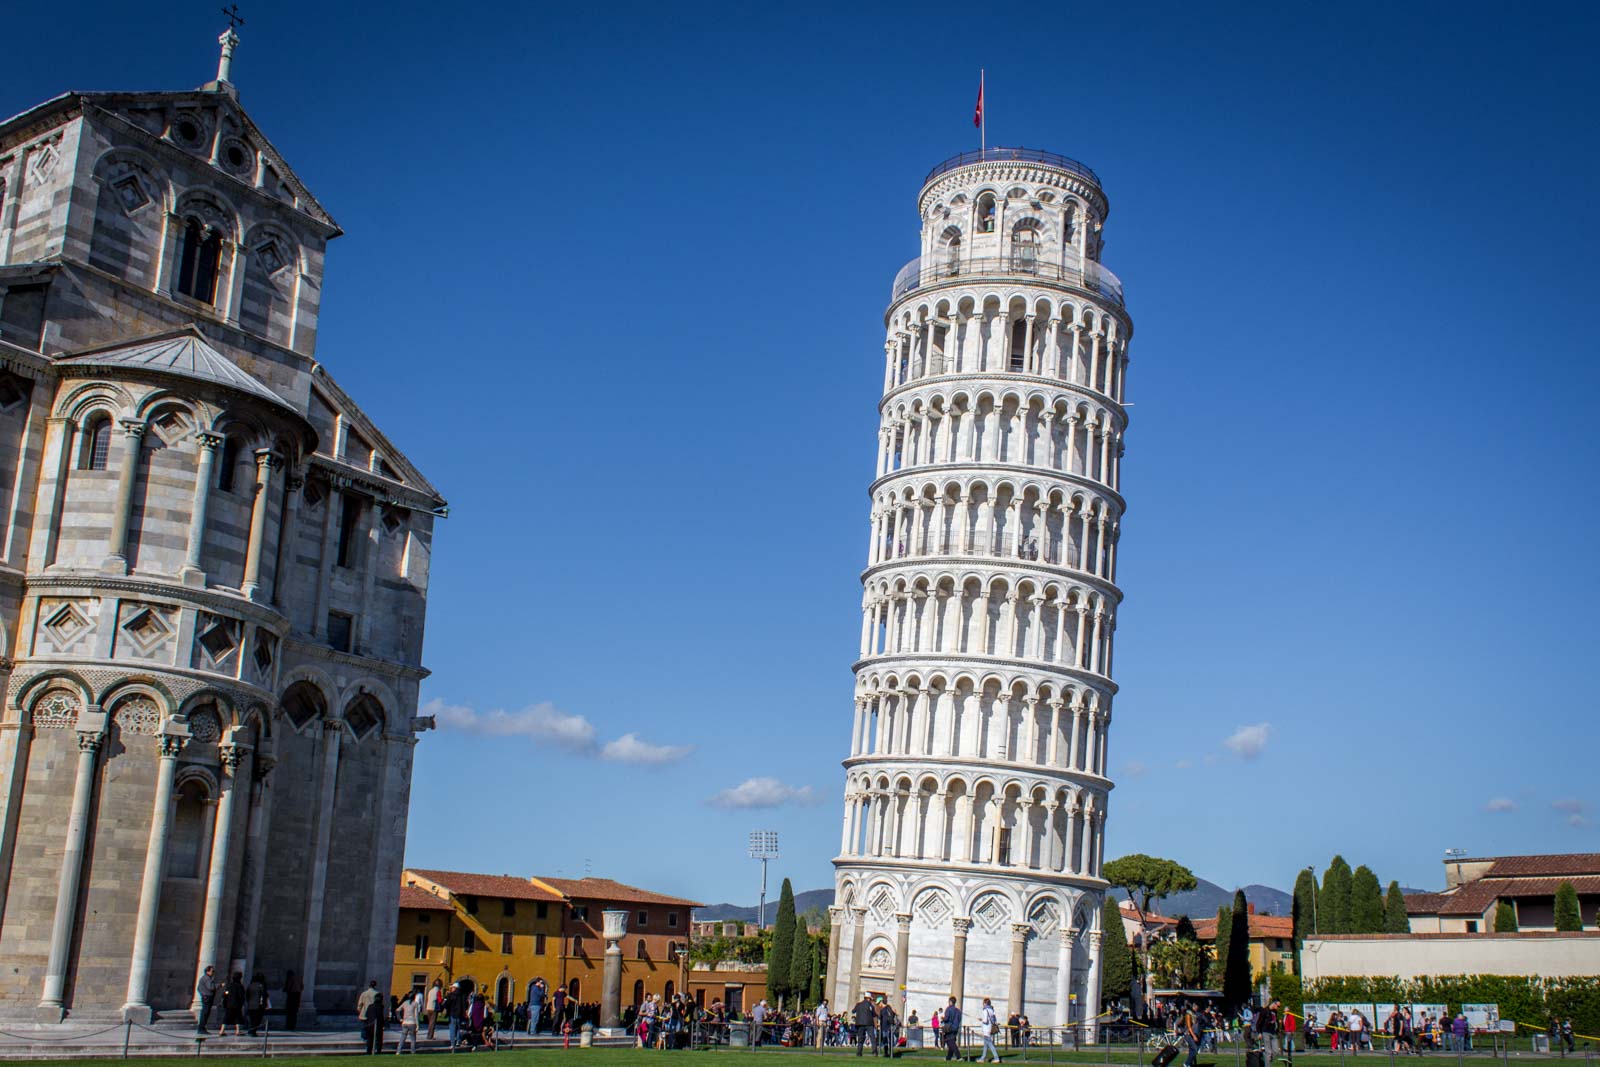 What Pasta Am I? Leaning Tower of Pisa, Italy